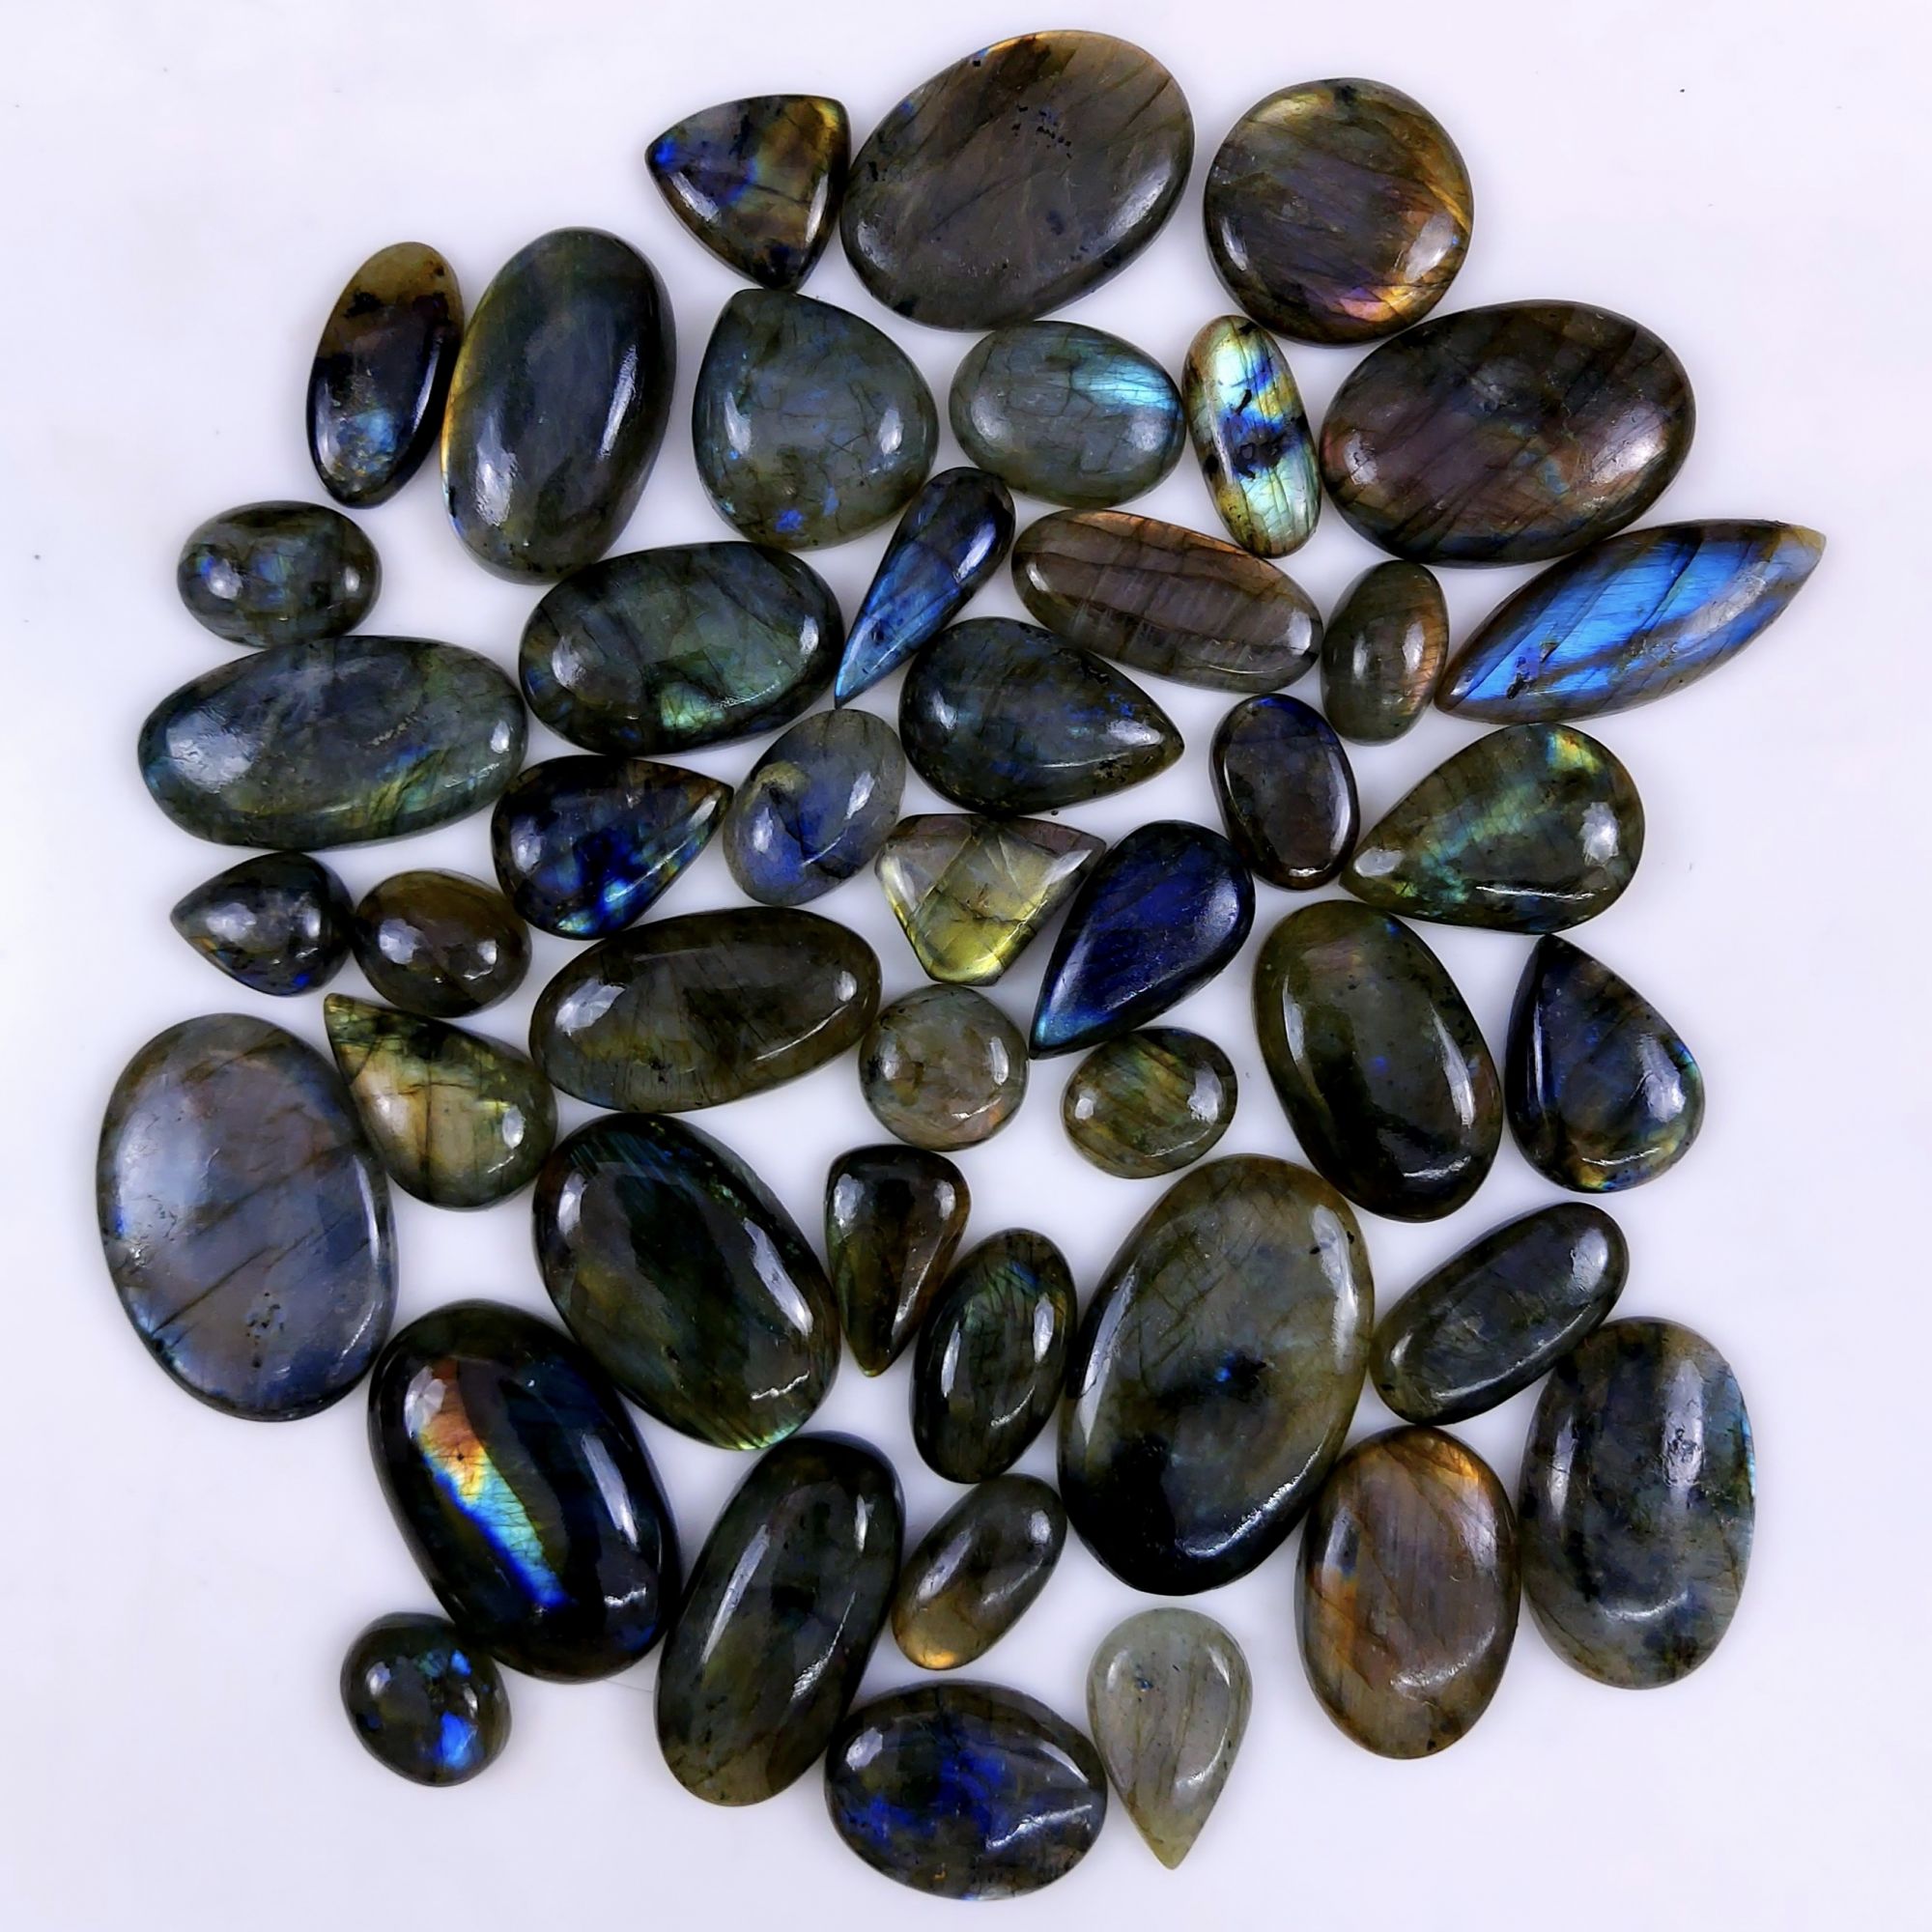 45pc 1596Cts Labradorite Cabochon Multifire Healing Crystal For Jewelry Supplies, Labradorite Necklace Handmade Wire Wrapped Gemstone Pendant 40x27 12x9mm#6306